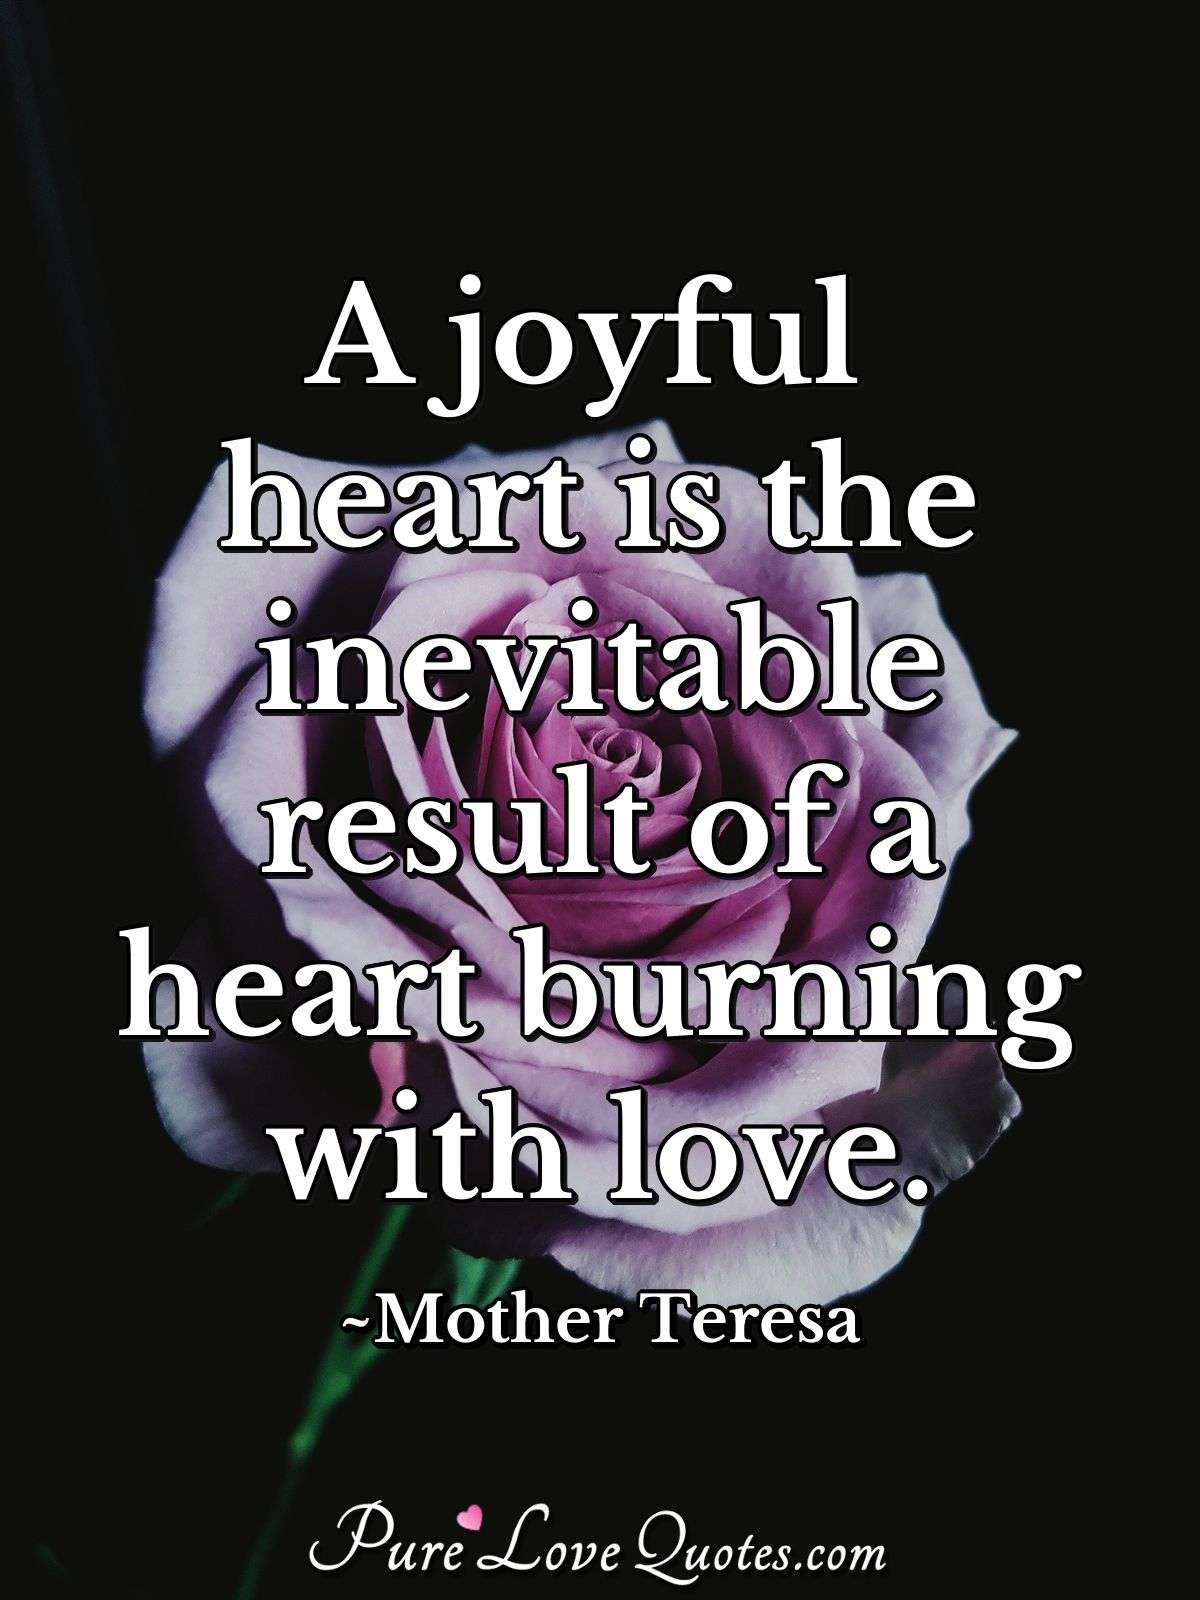 A joyful heart is the inevitable result of a heart burning with love. - Mother Teresa